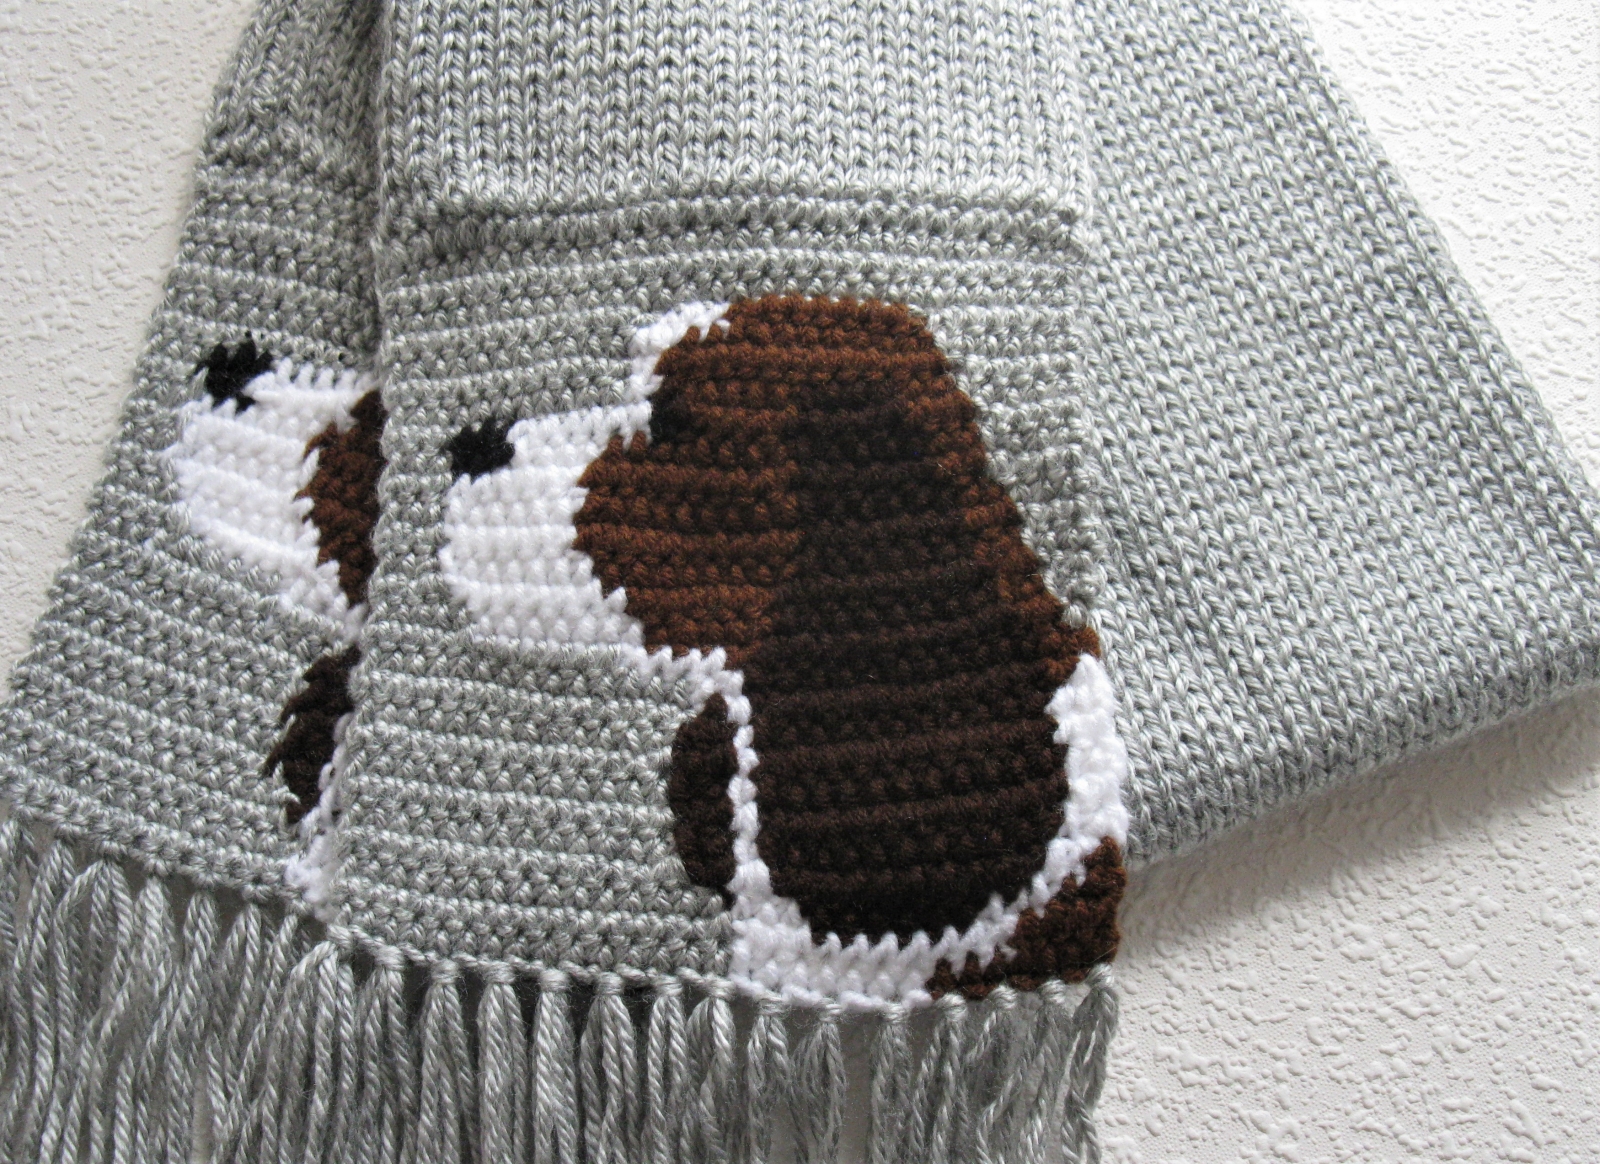 English springer spaniel scarf. Handmade, gray knit scarf with a brown ...